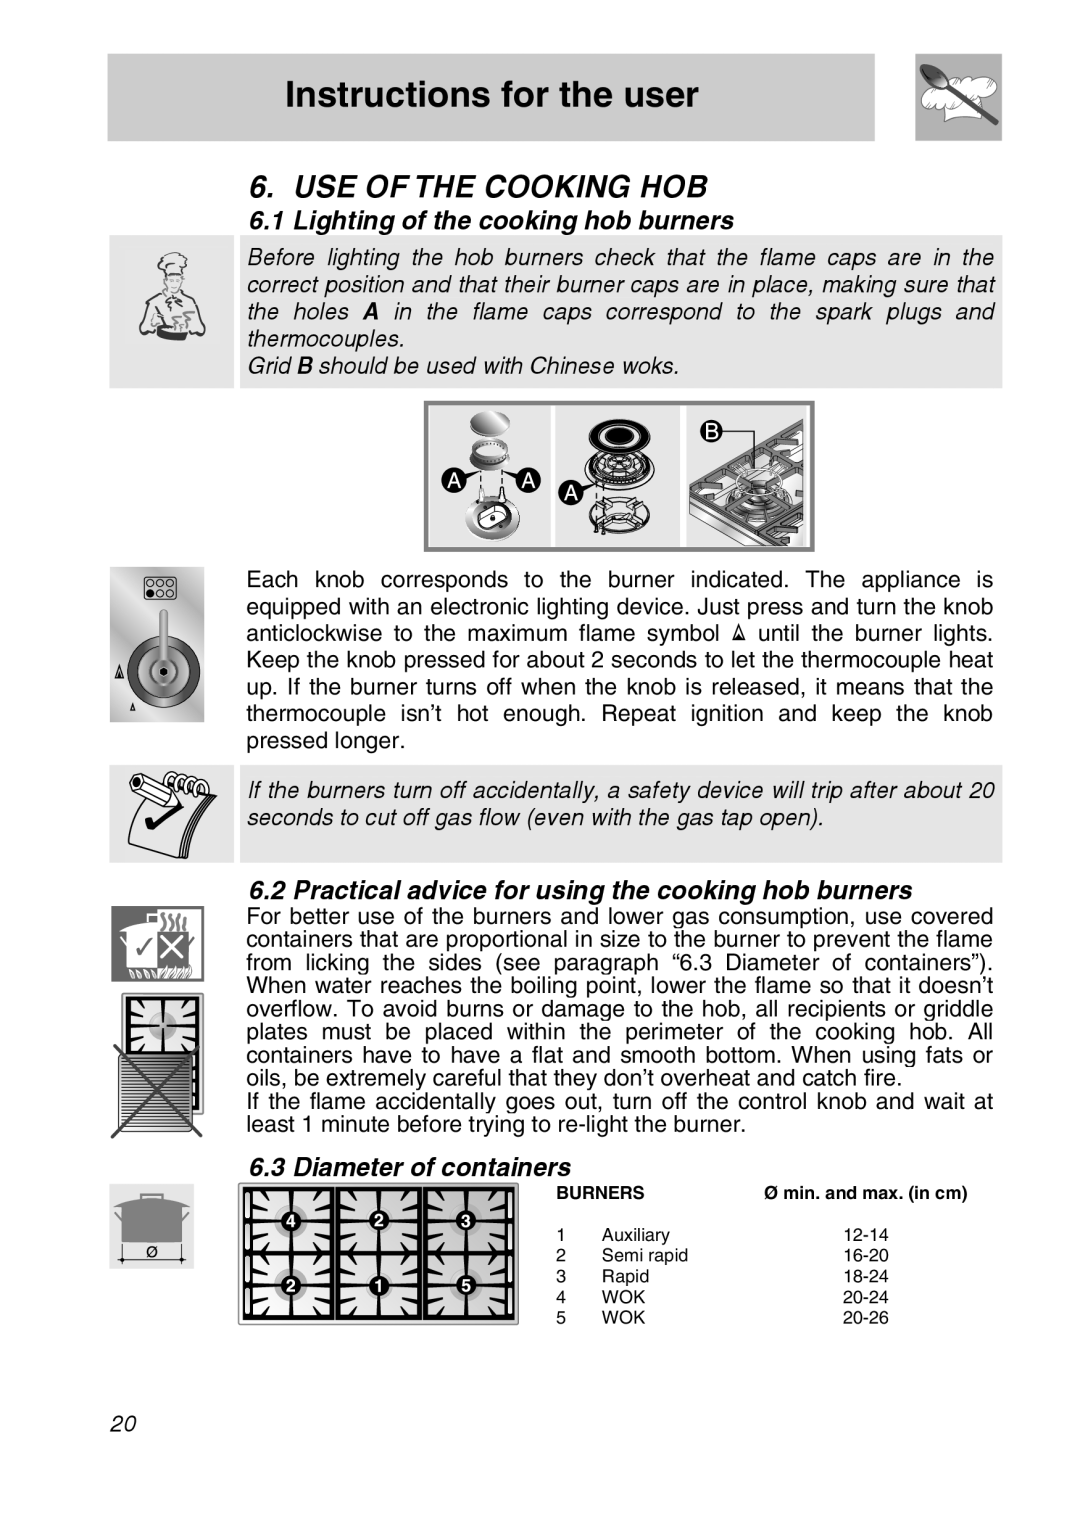 Smeg A21X-6 Use Of The Cooking Hob, Lighting of the cooking hob burners, Diameter of containers, Instructions for the user 